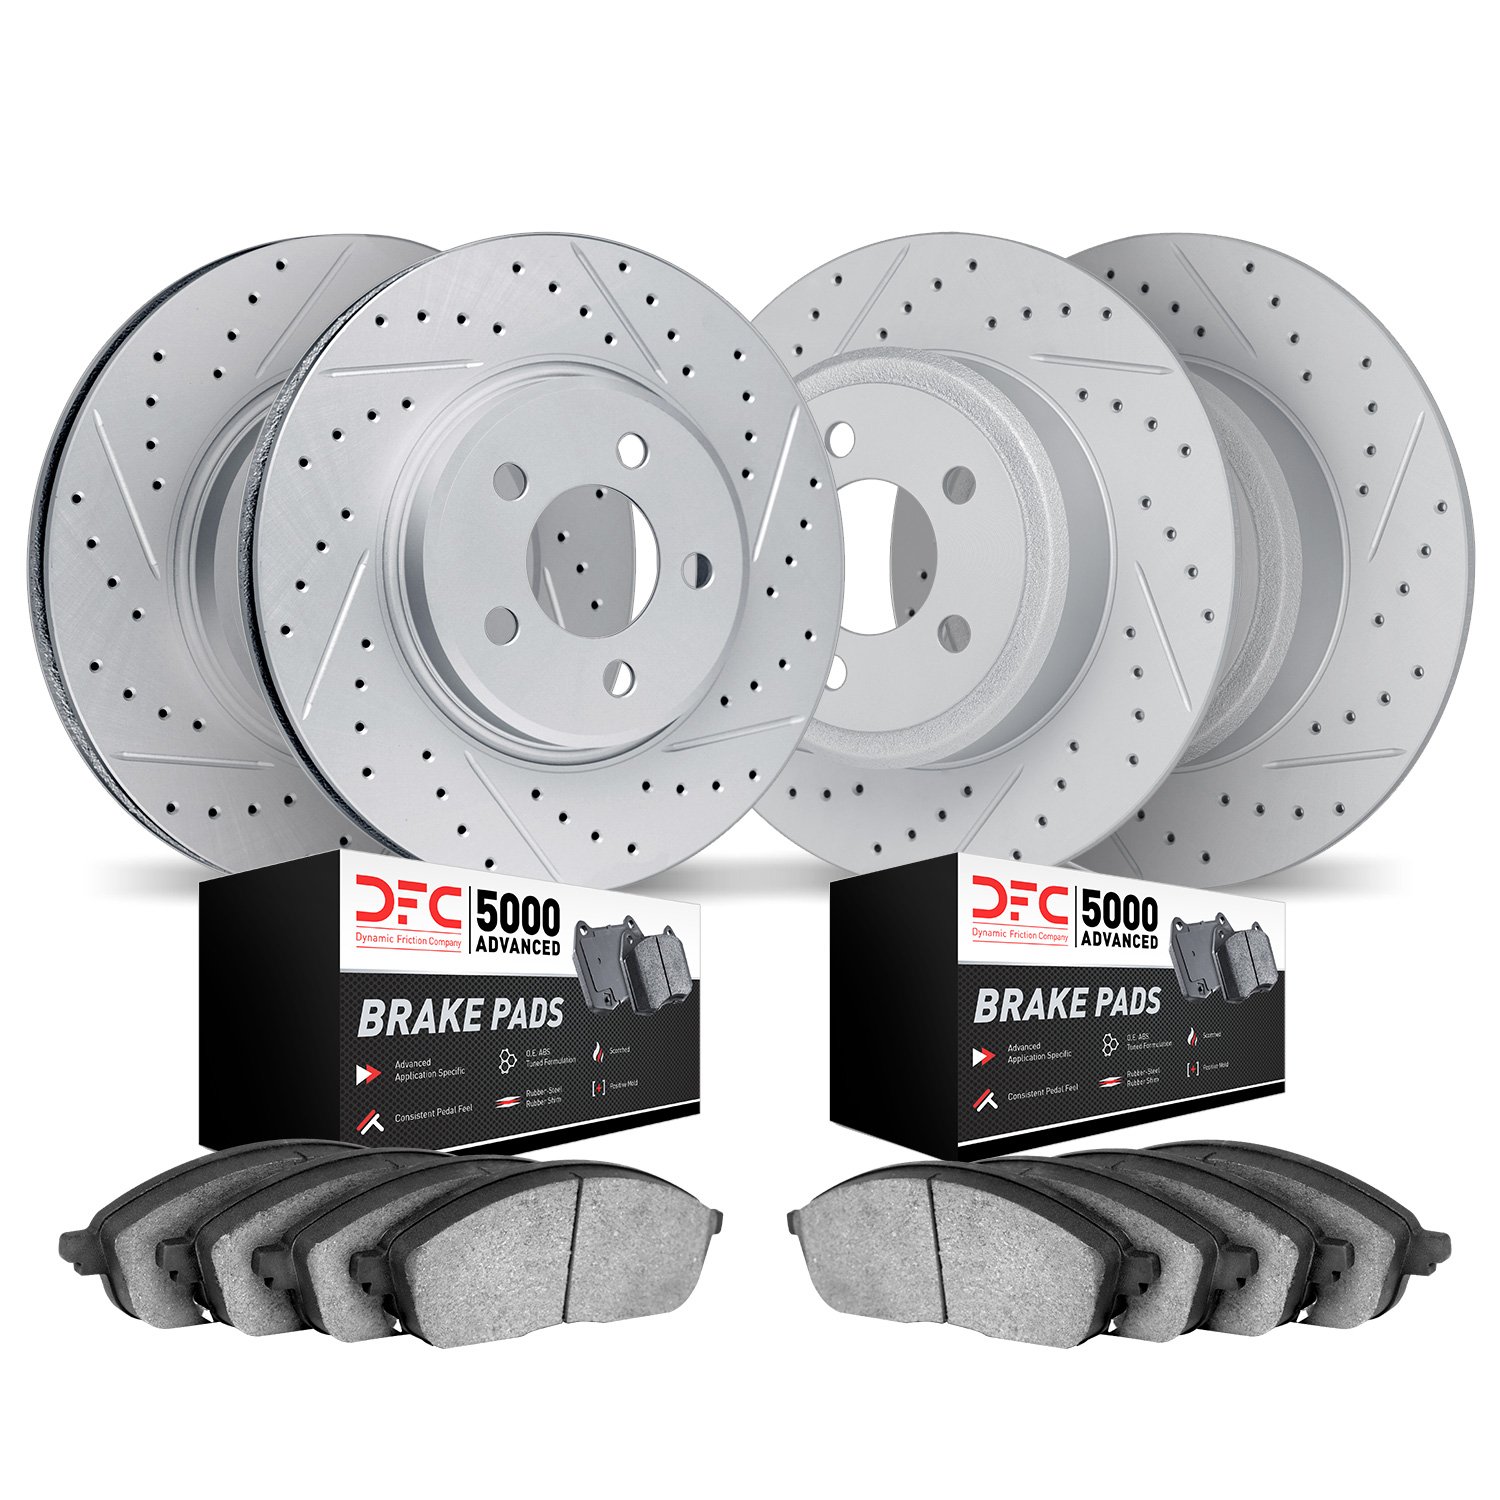 2504-47263 Geoperformance Drilled/Slotted Rotors w/5000 Advanced Brake Pads Kit, 2004-2008 GM, Position: Front and Rear